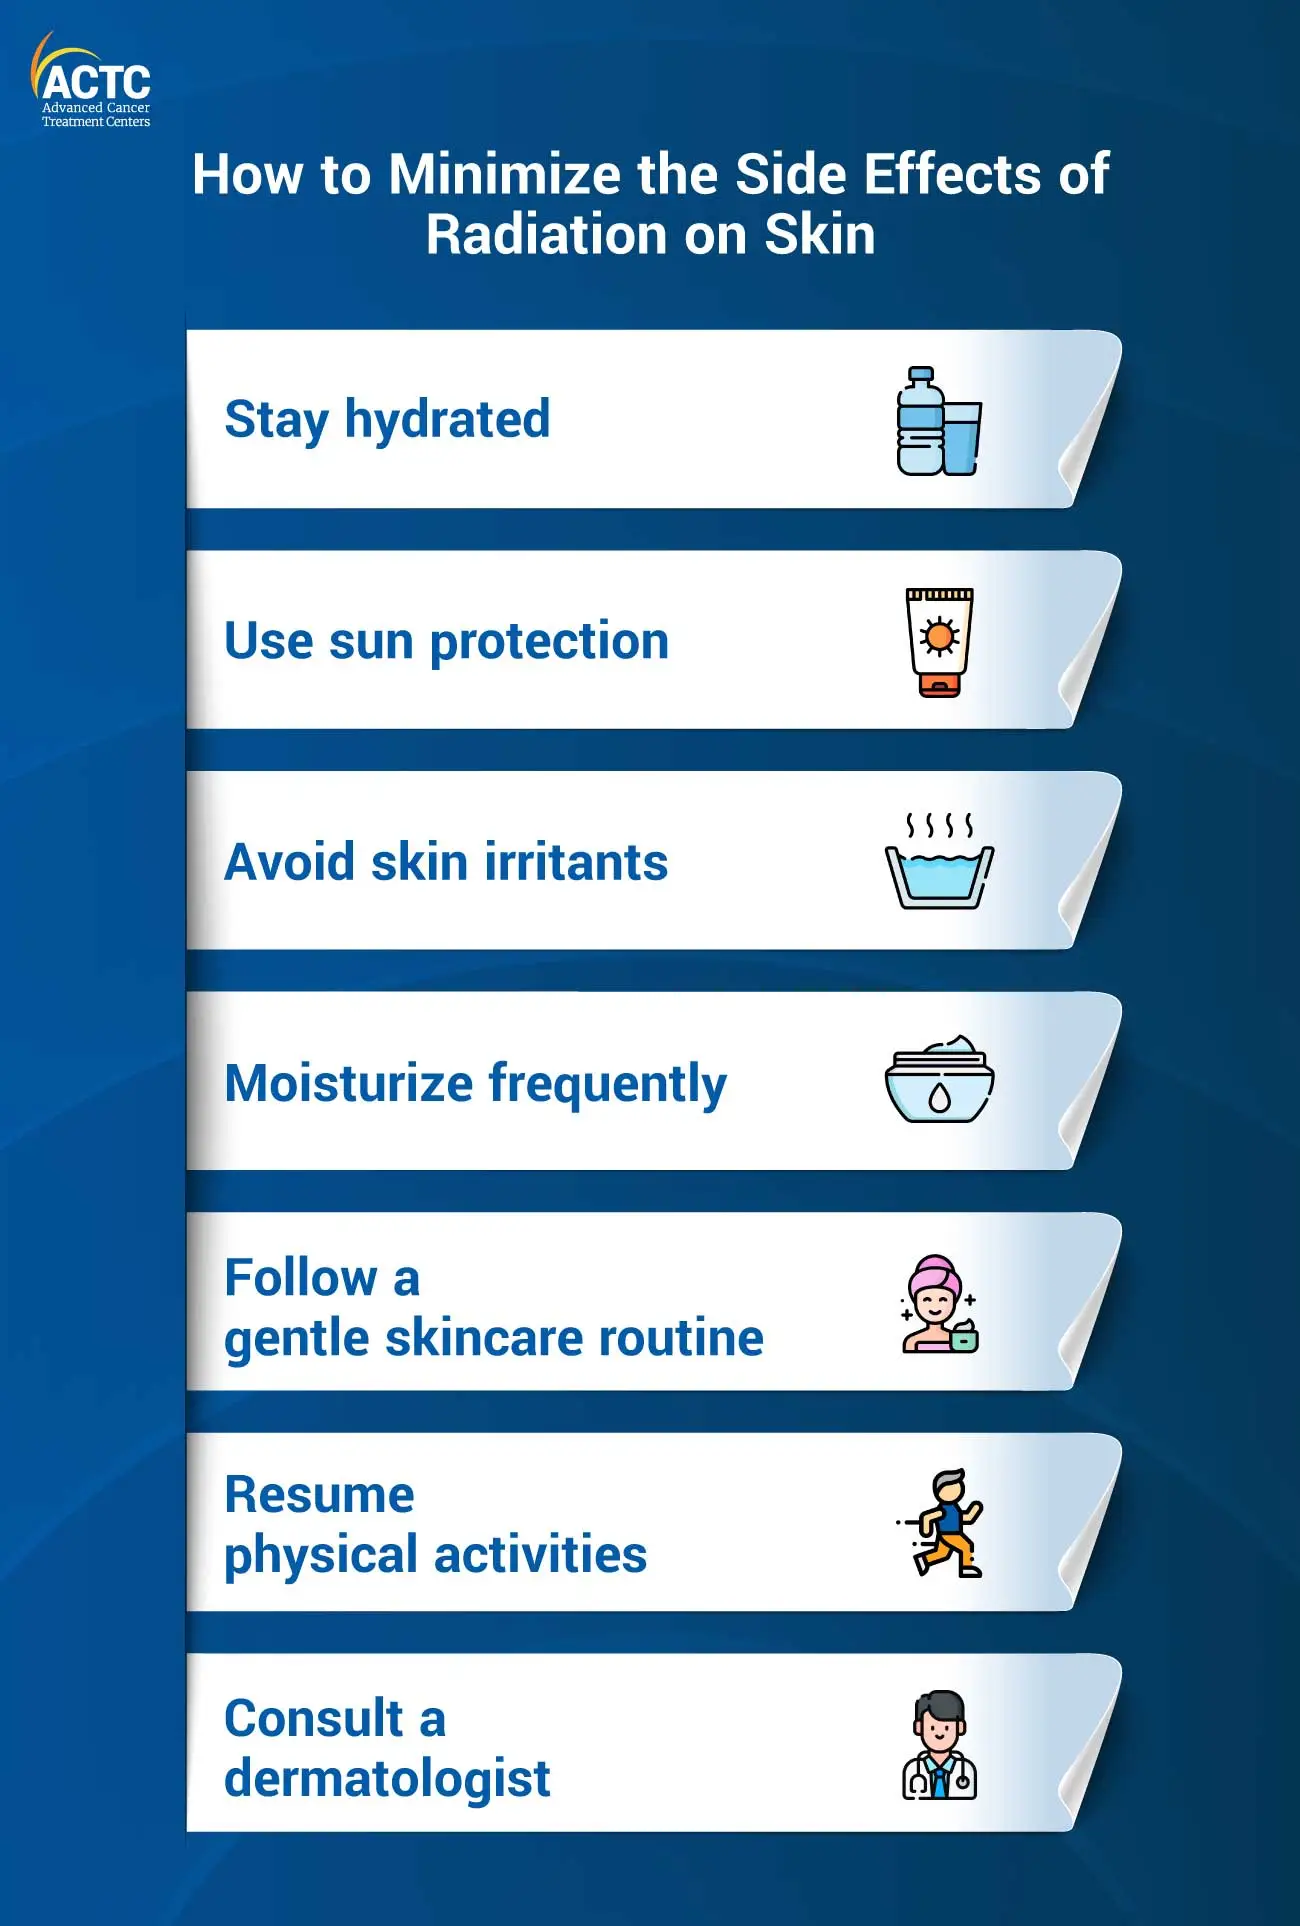 How to Minimize the Side Effects of Radiation on Skin